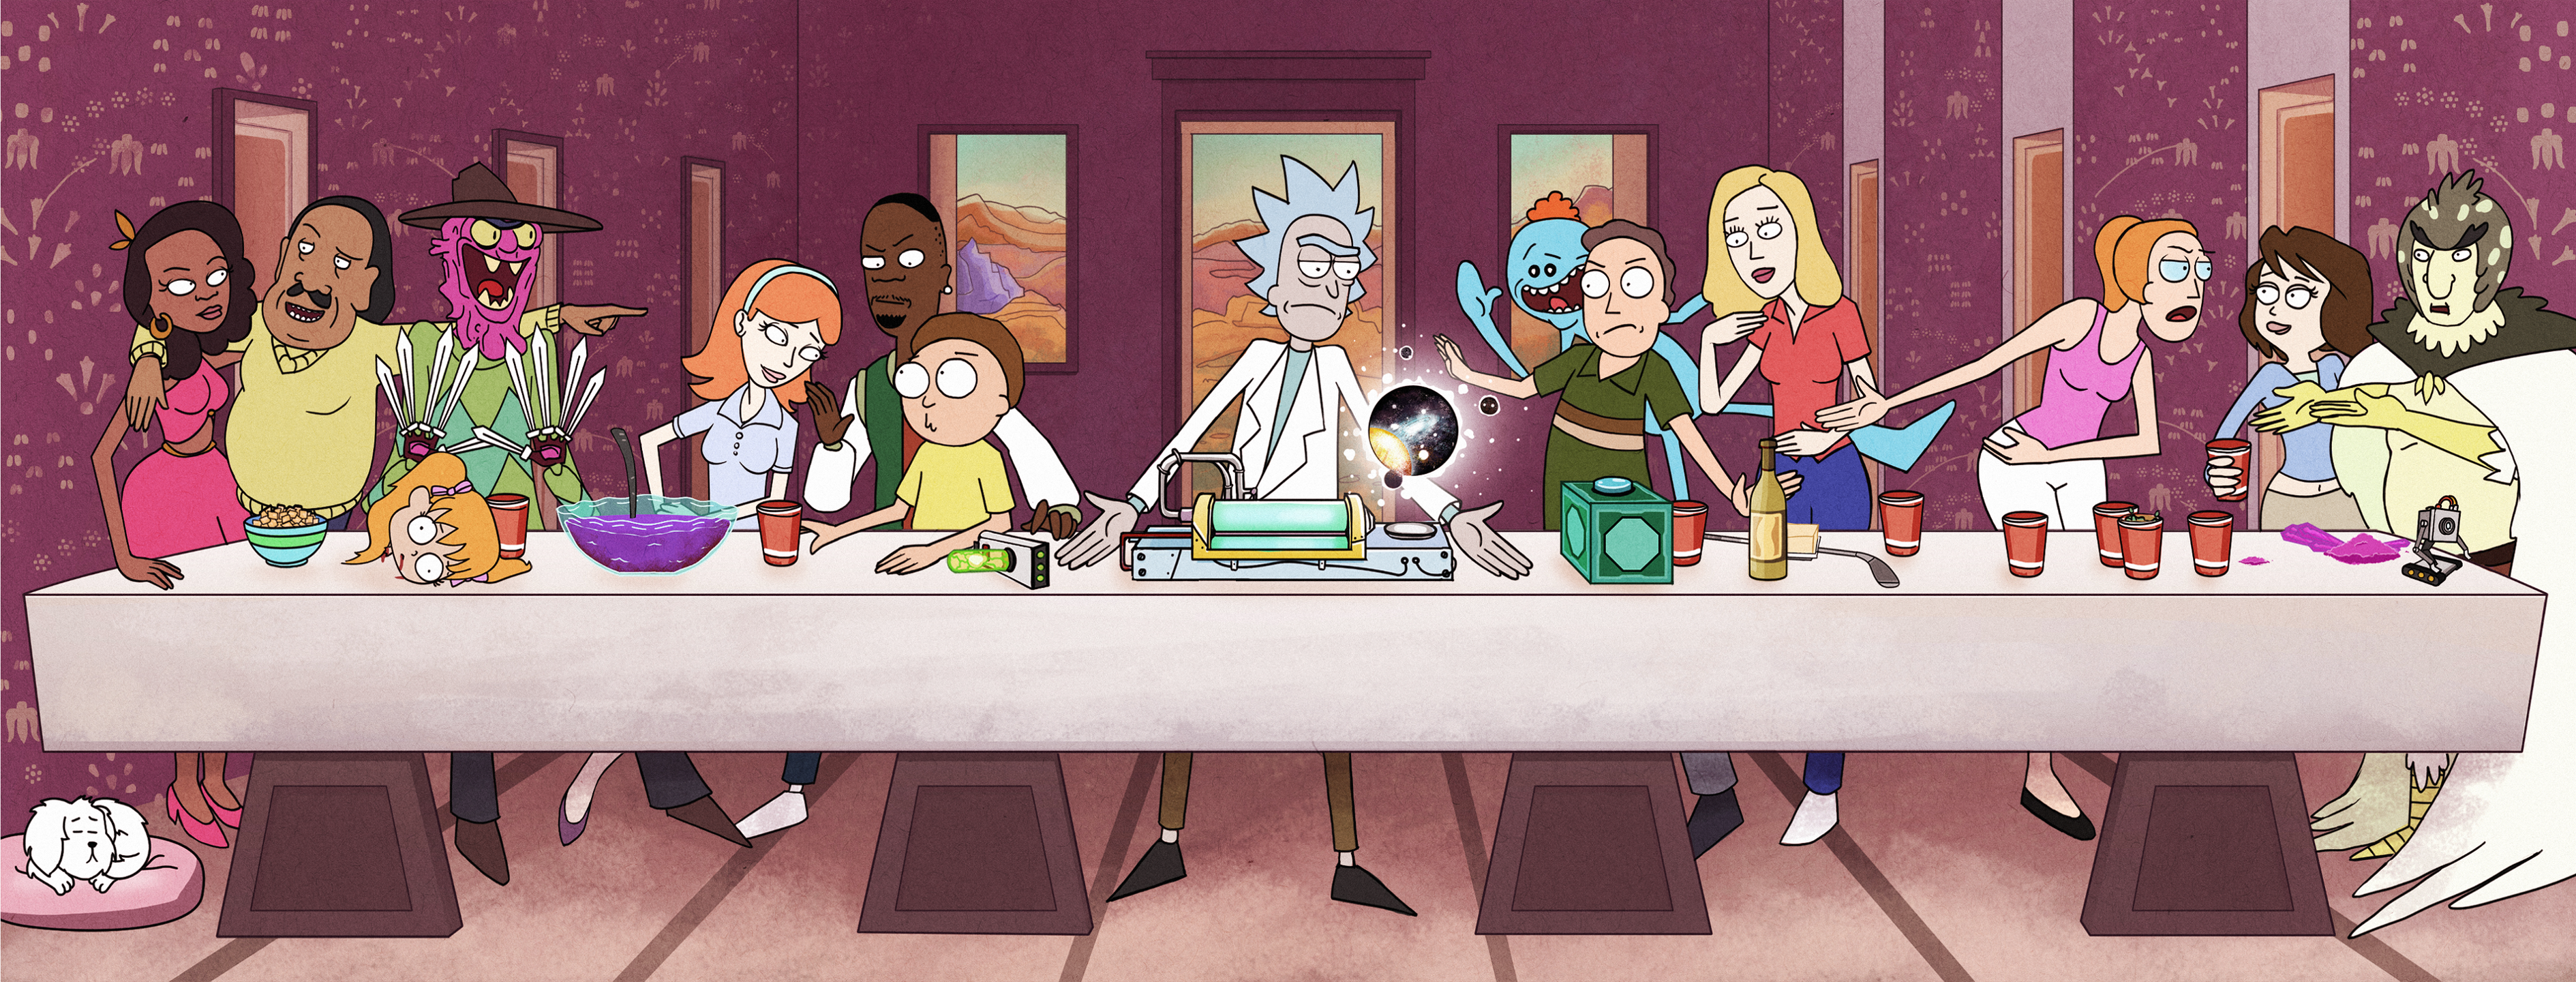 General 3779x1440 Rick and Morty Rick Sanchez Morty Smith Bird Person Beth Smith Jerry Smith Summer Smith Mr. Meeseeks The Last Supper cartoon TV series DeviantArt digital art